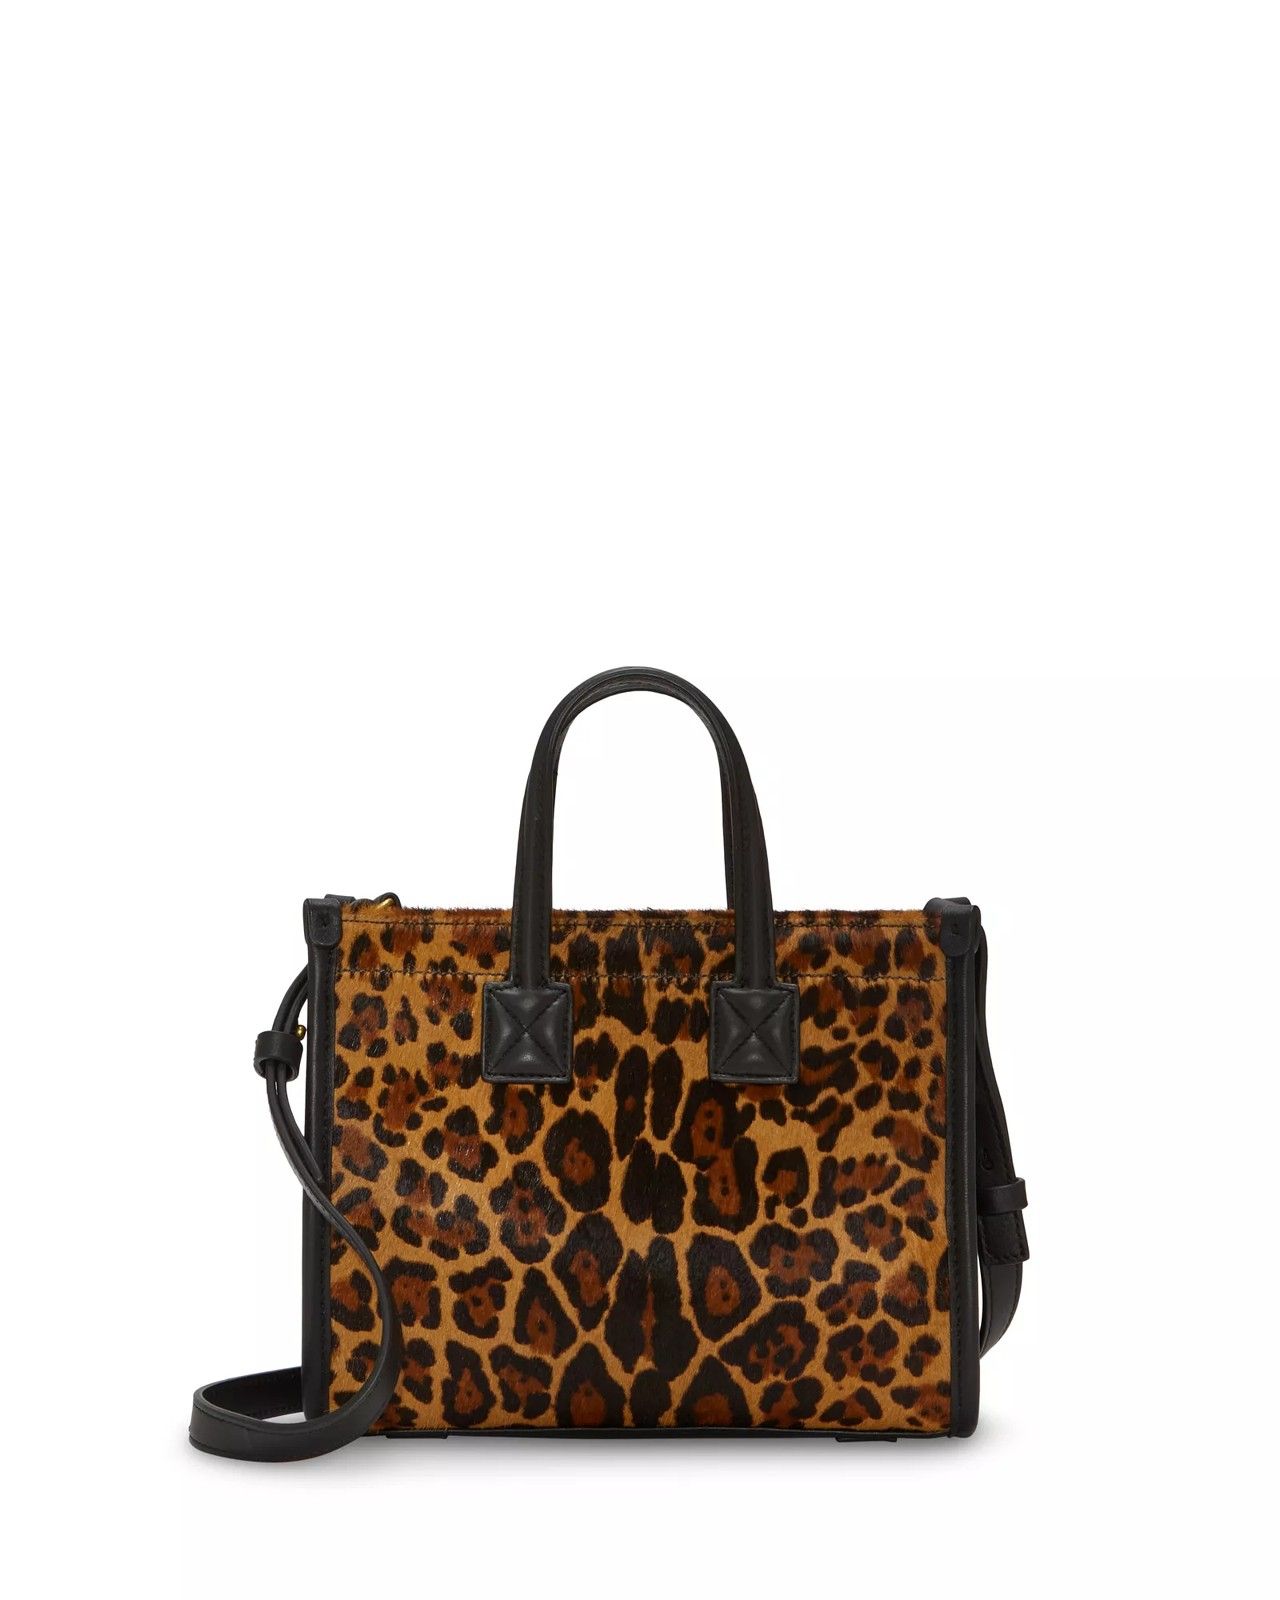 Vince Camuto Saly Small Tote | Vince Camuto